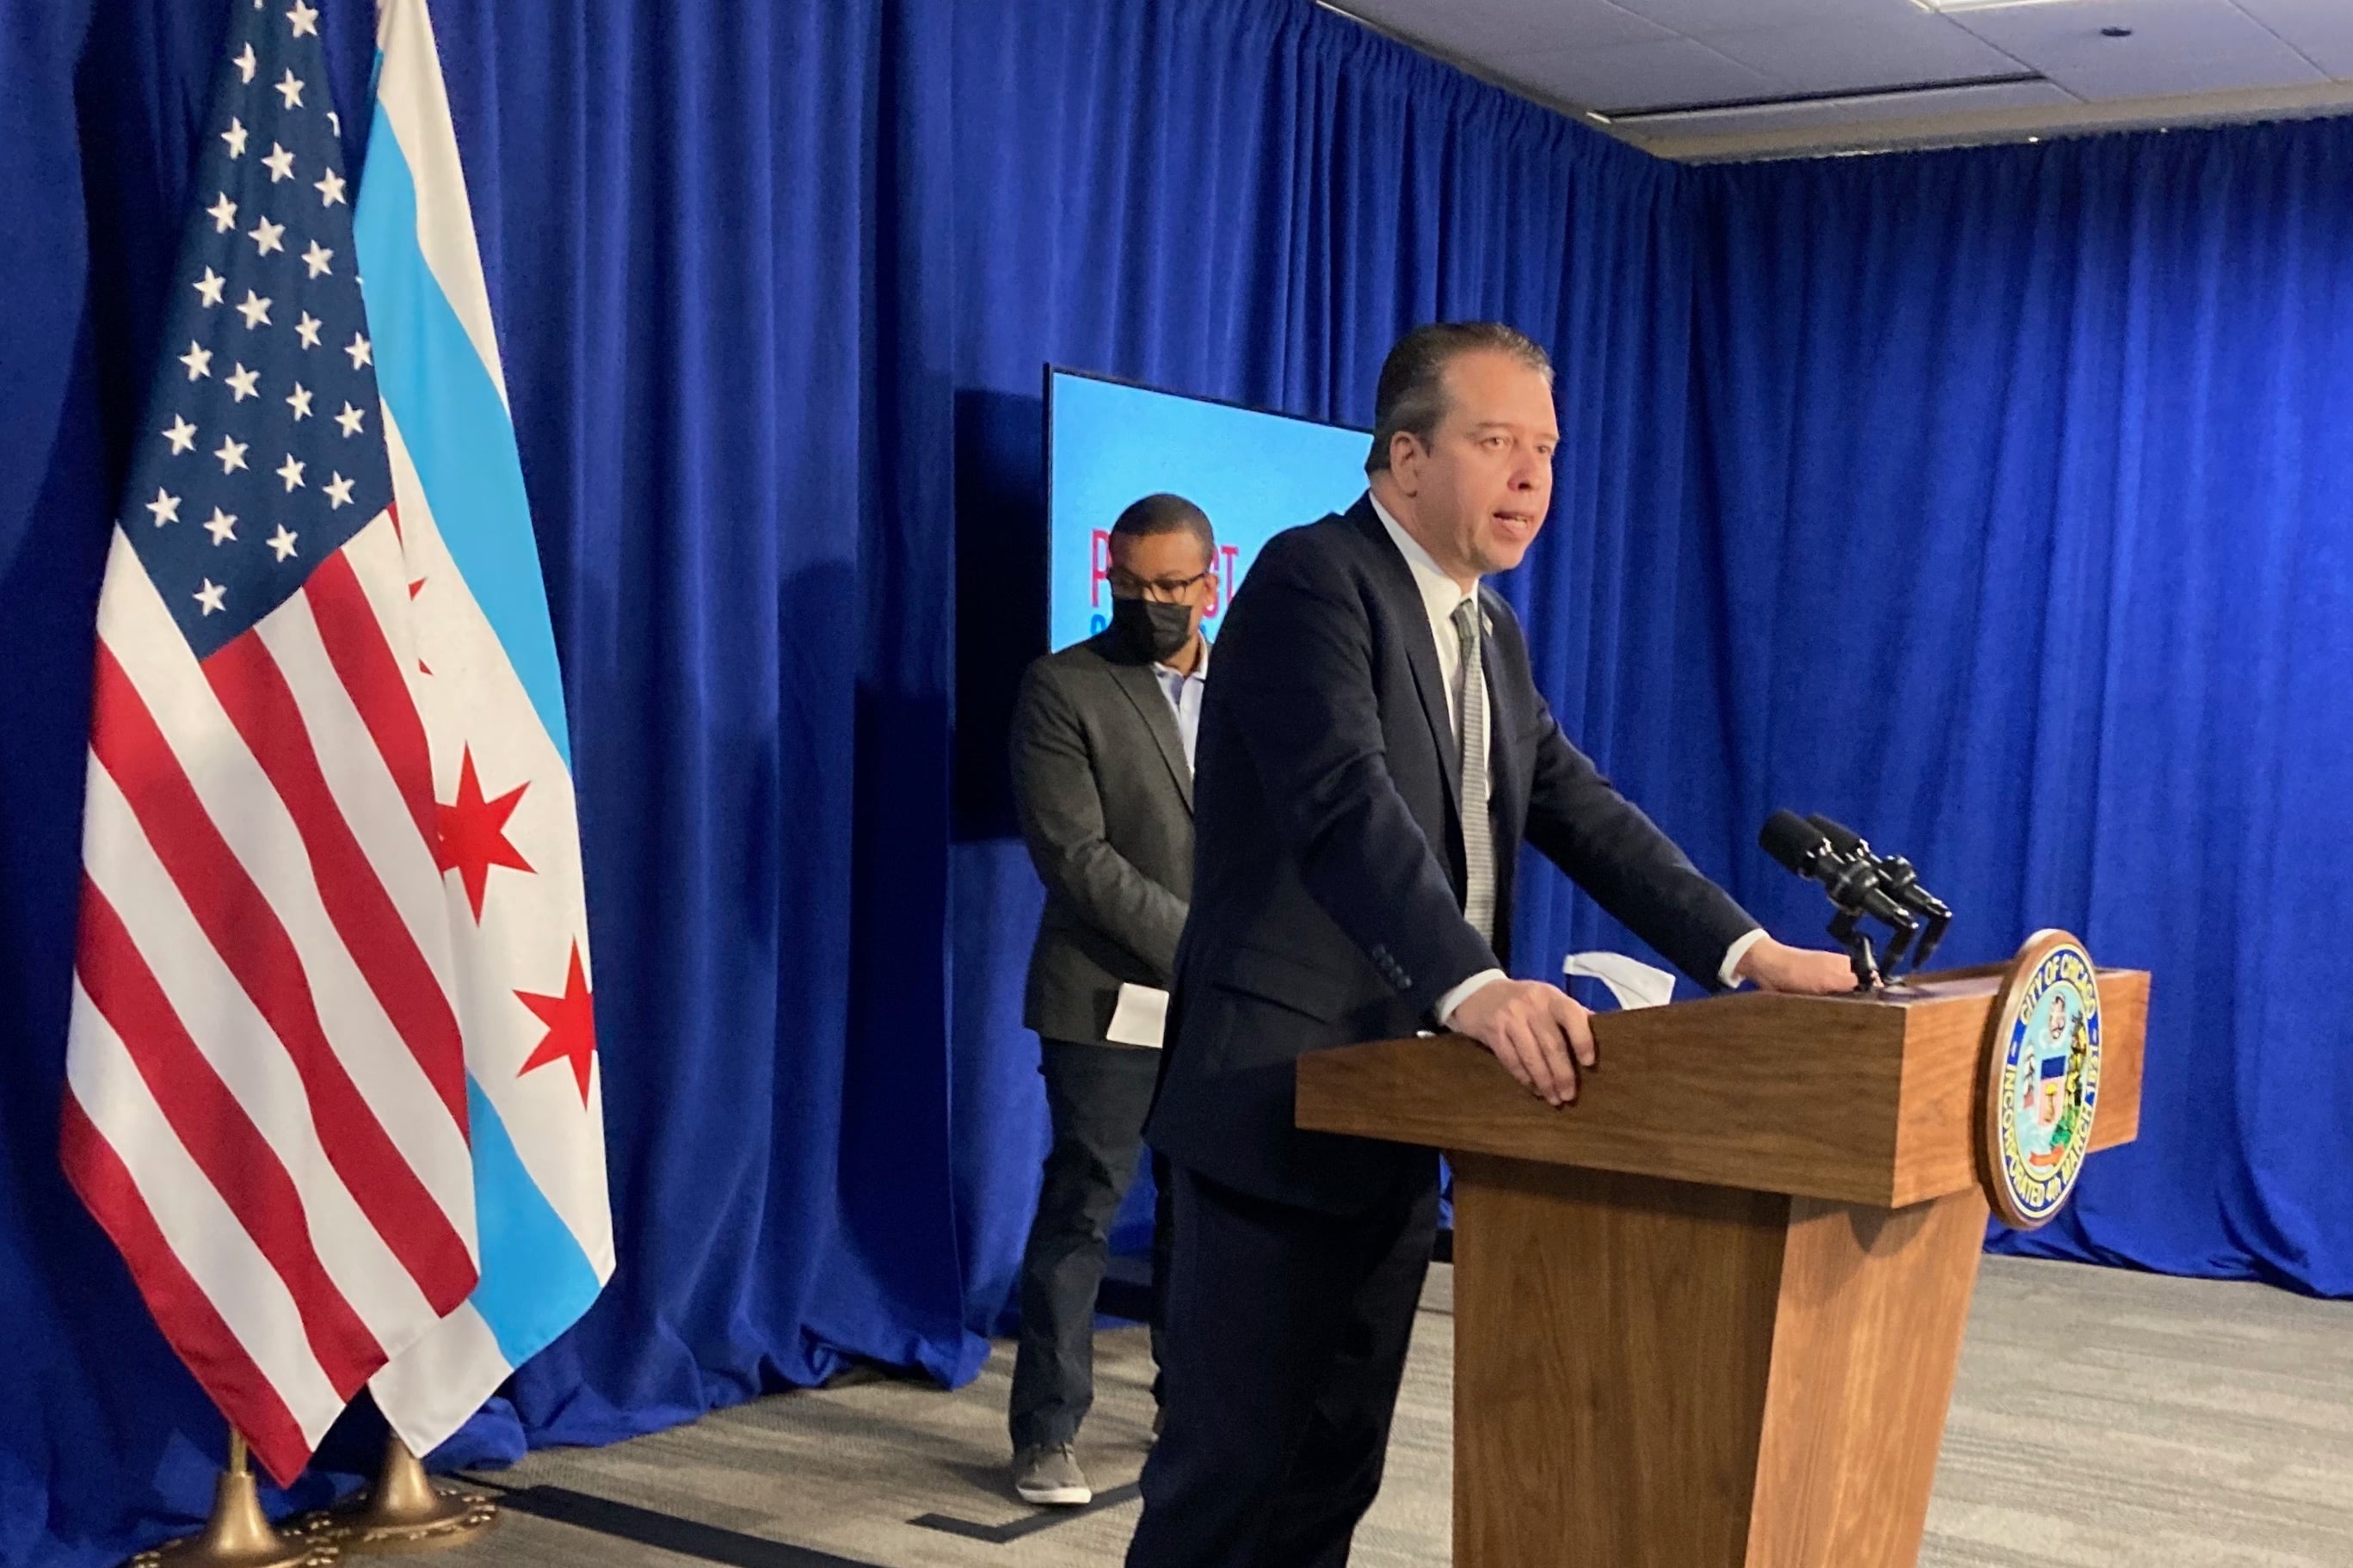 Speaking from a podium inside City Hall, Chicago schools chief Pedro Martinez promises more transparency about COVID-19 data on his second day on the job.